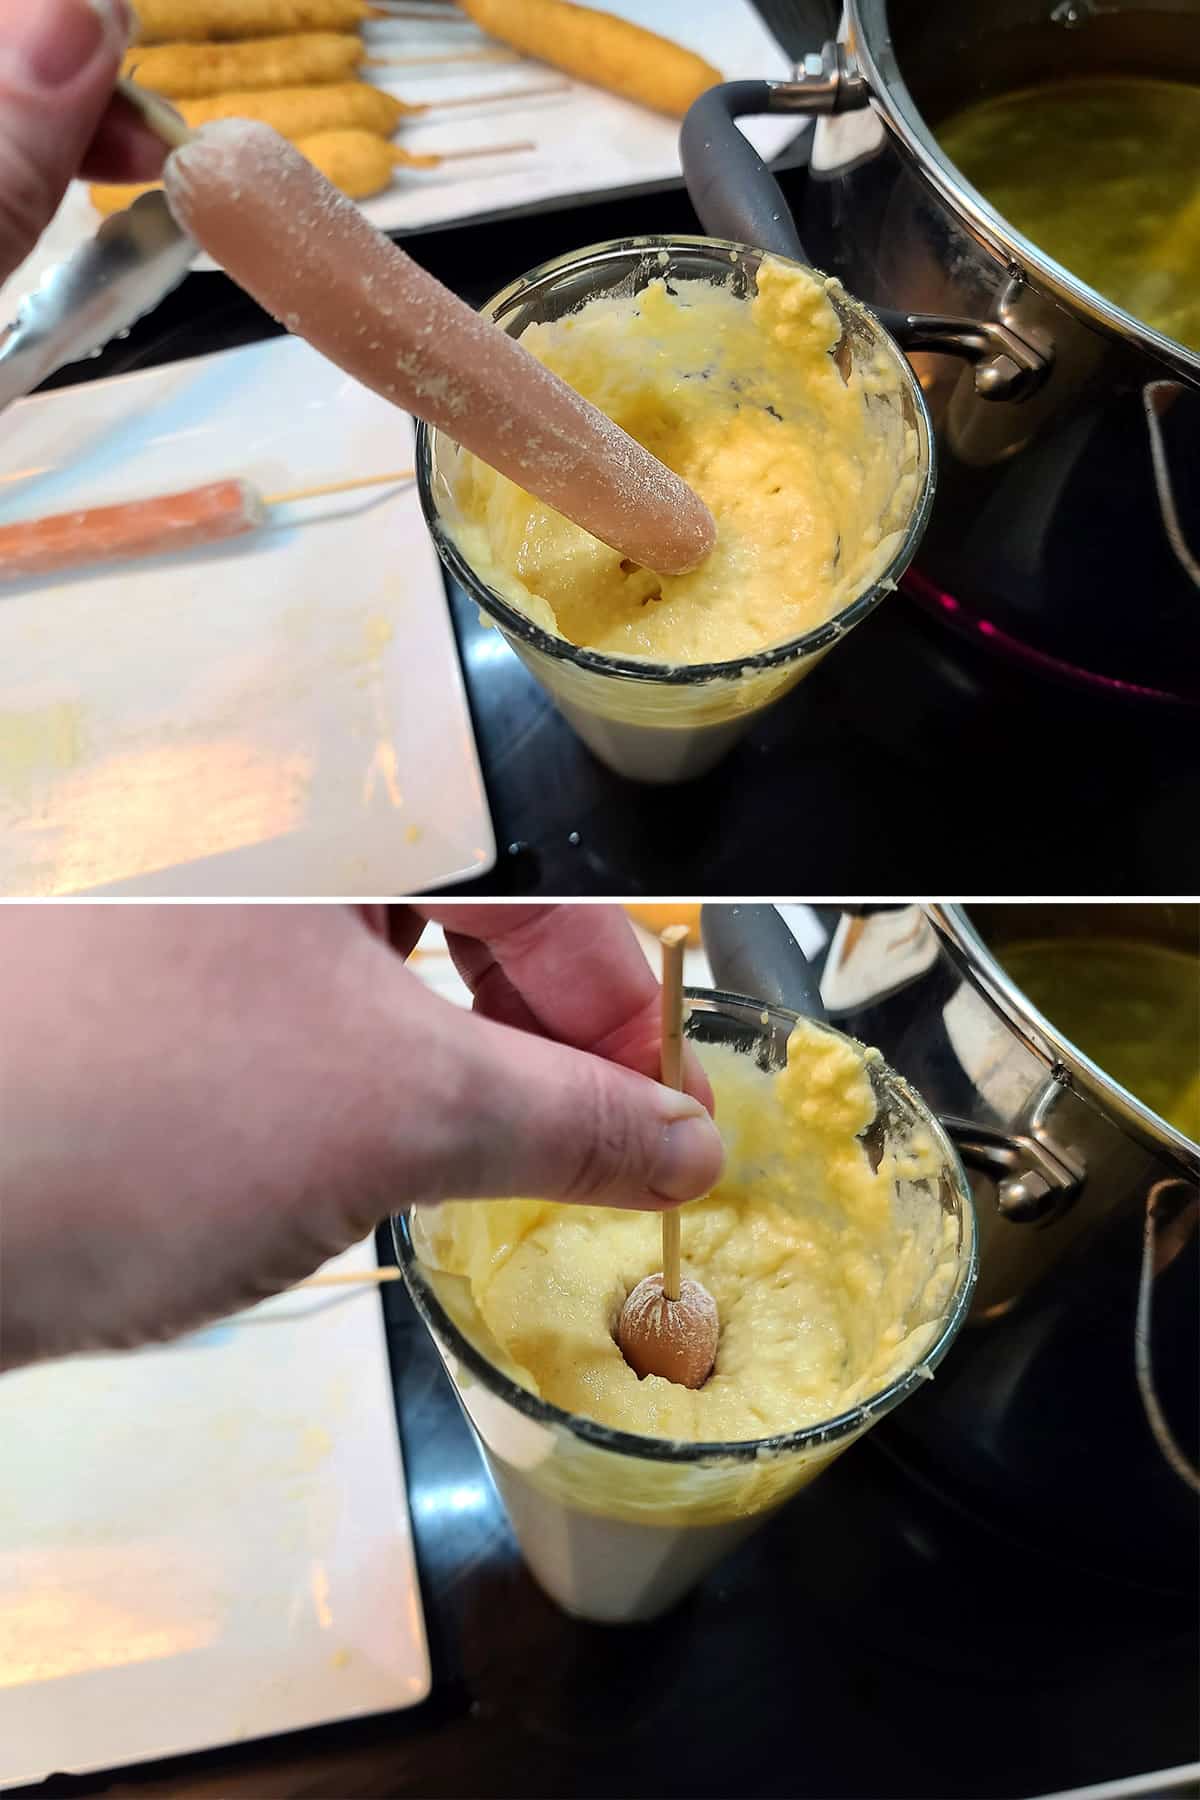 A 2 part image showing a prepared weiner being dipped in the glass of batter.